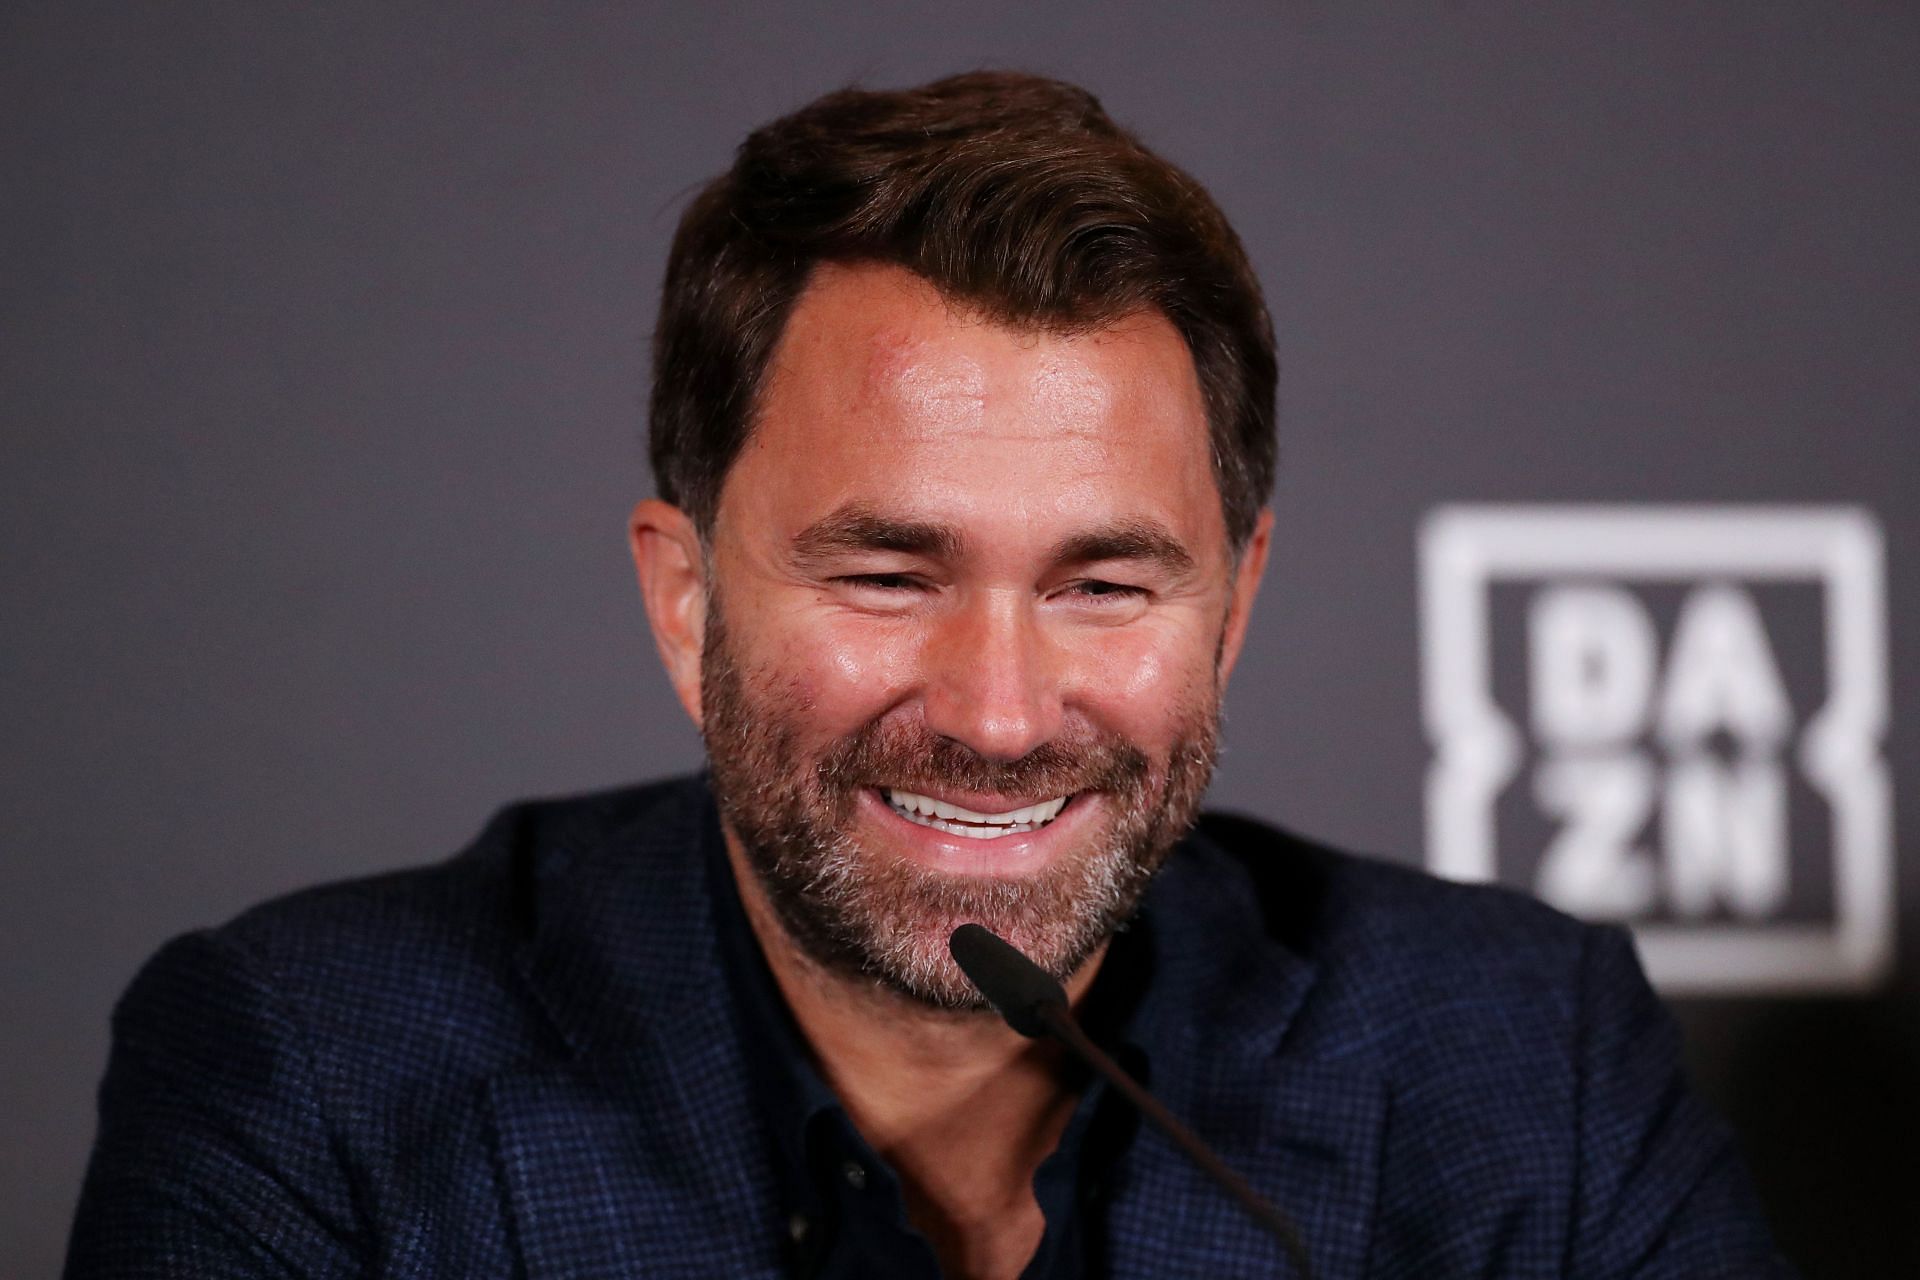 Eddie Hearn at a Press Conference